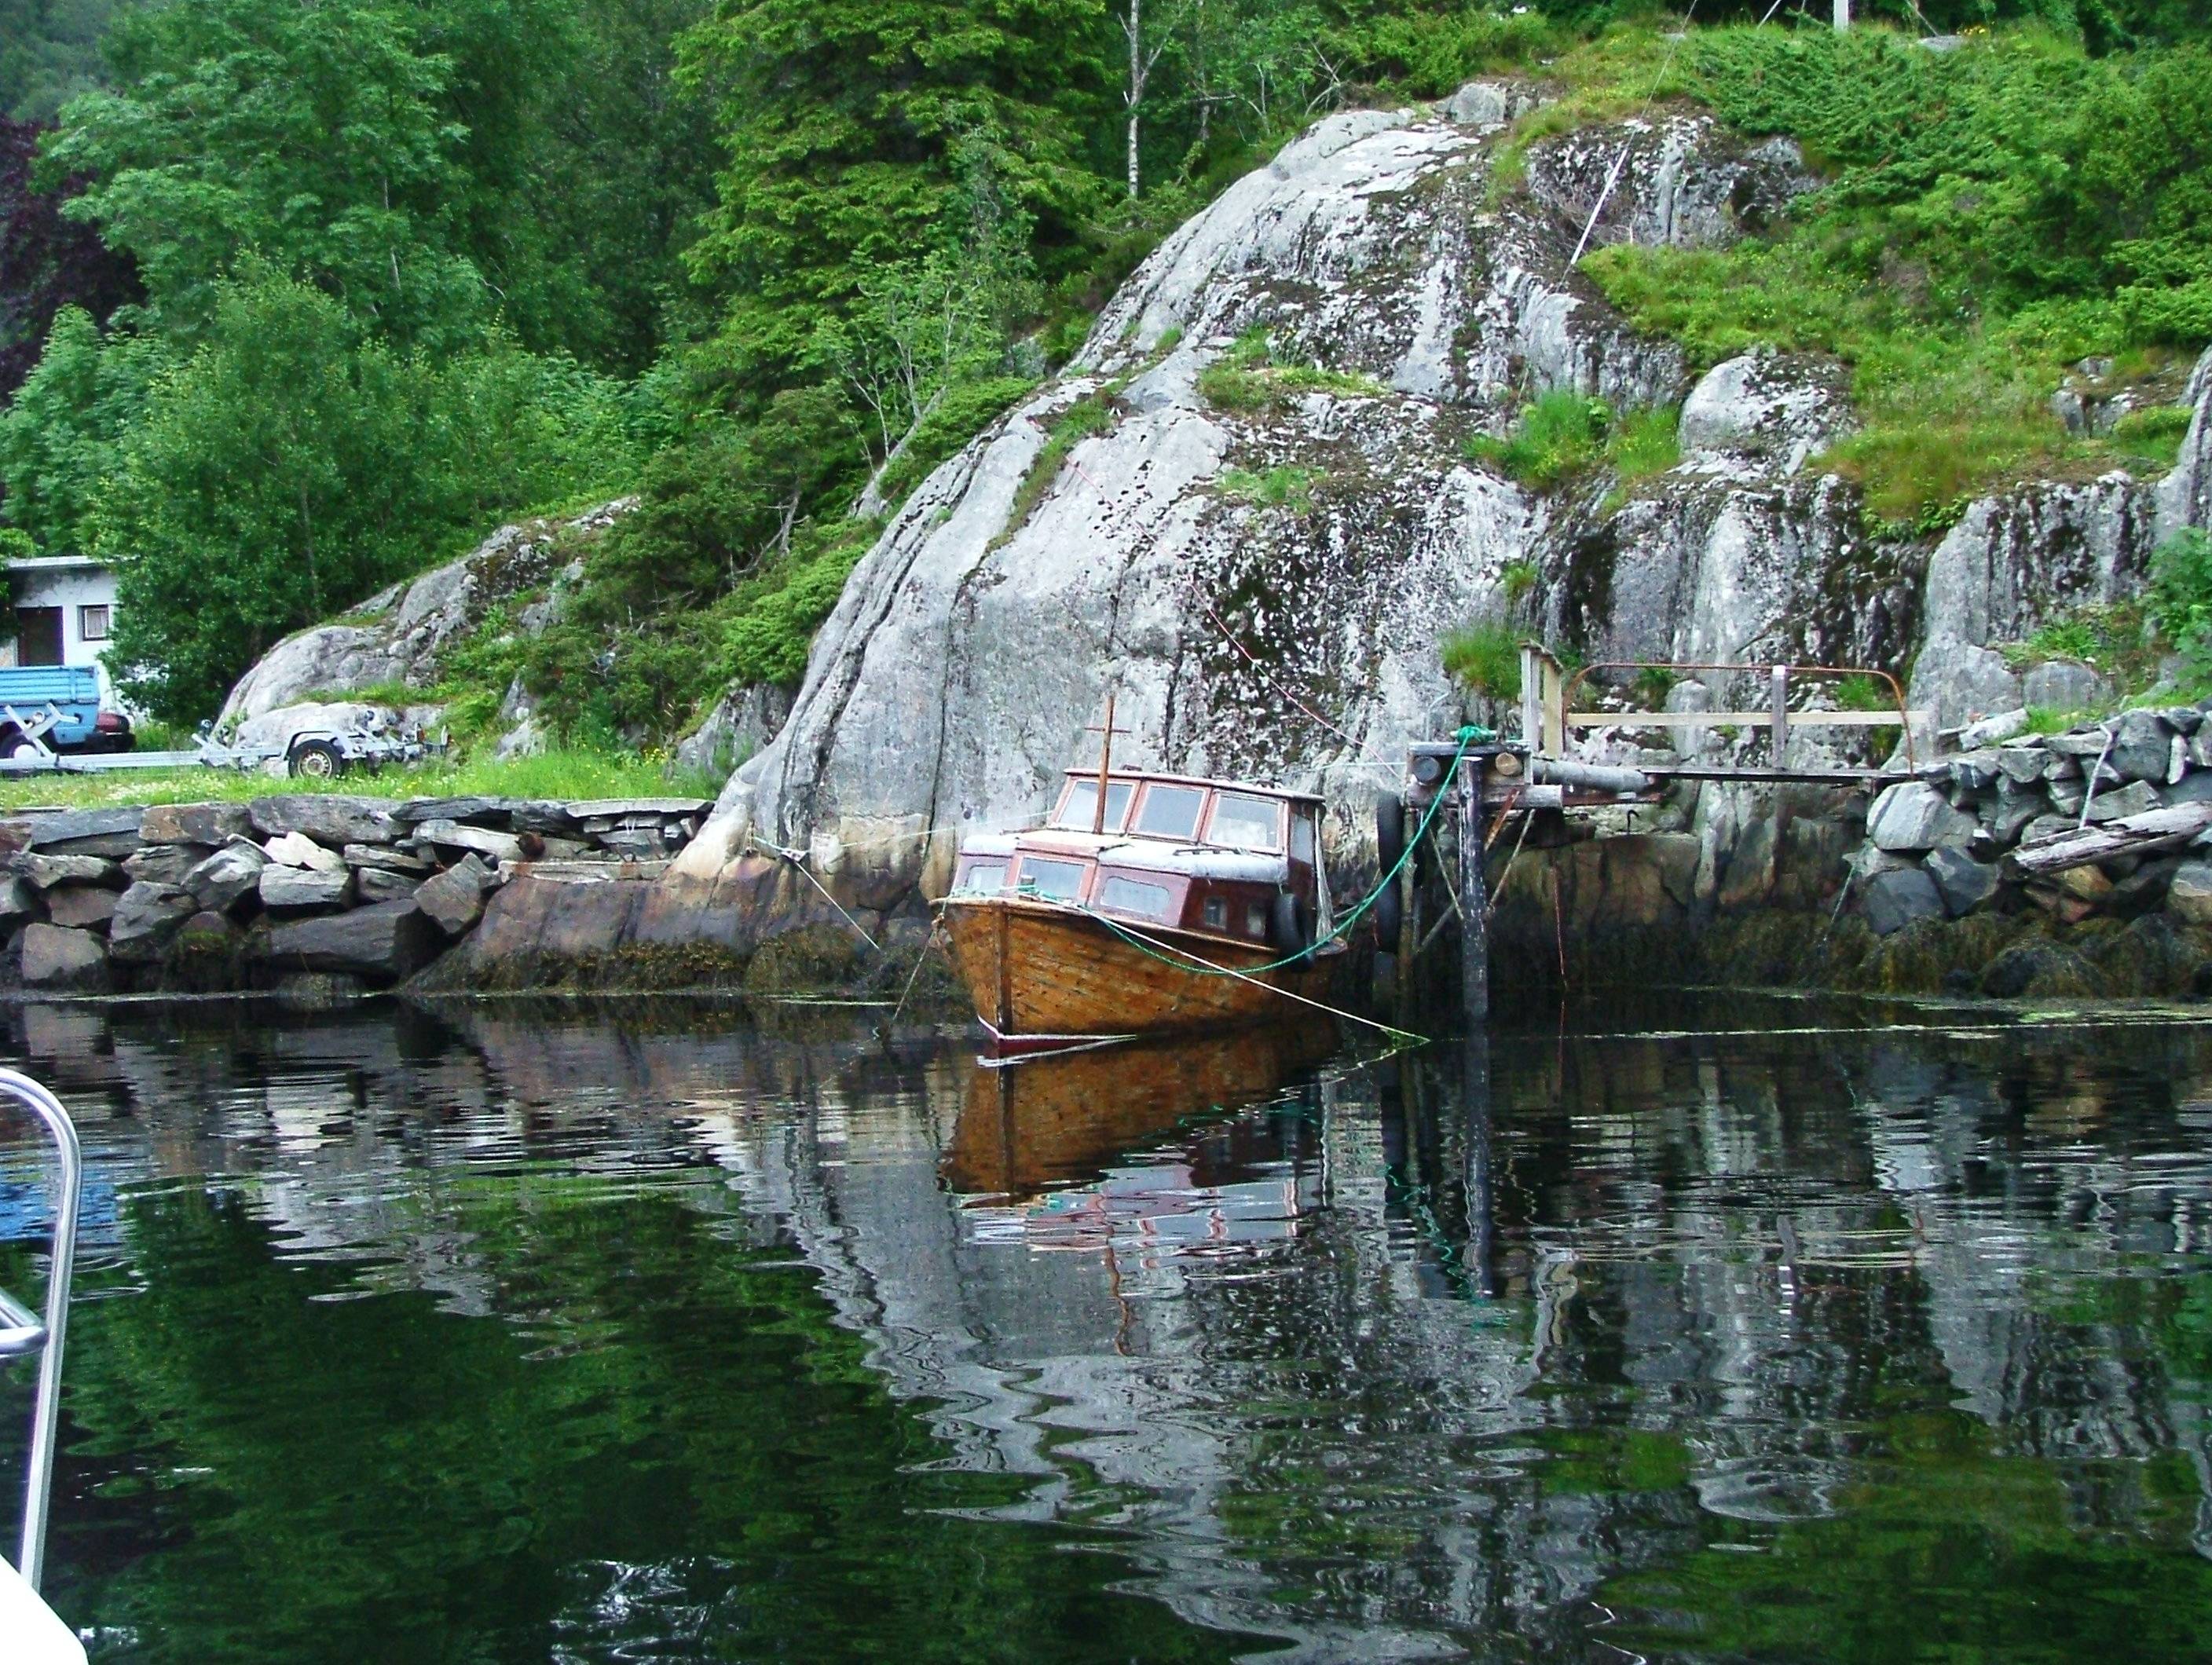 The old Boat at Eivinds Vik